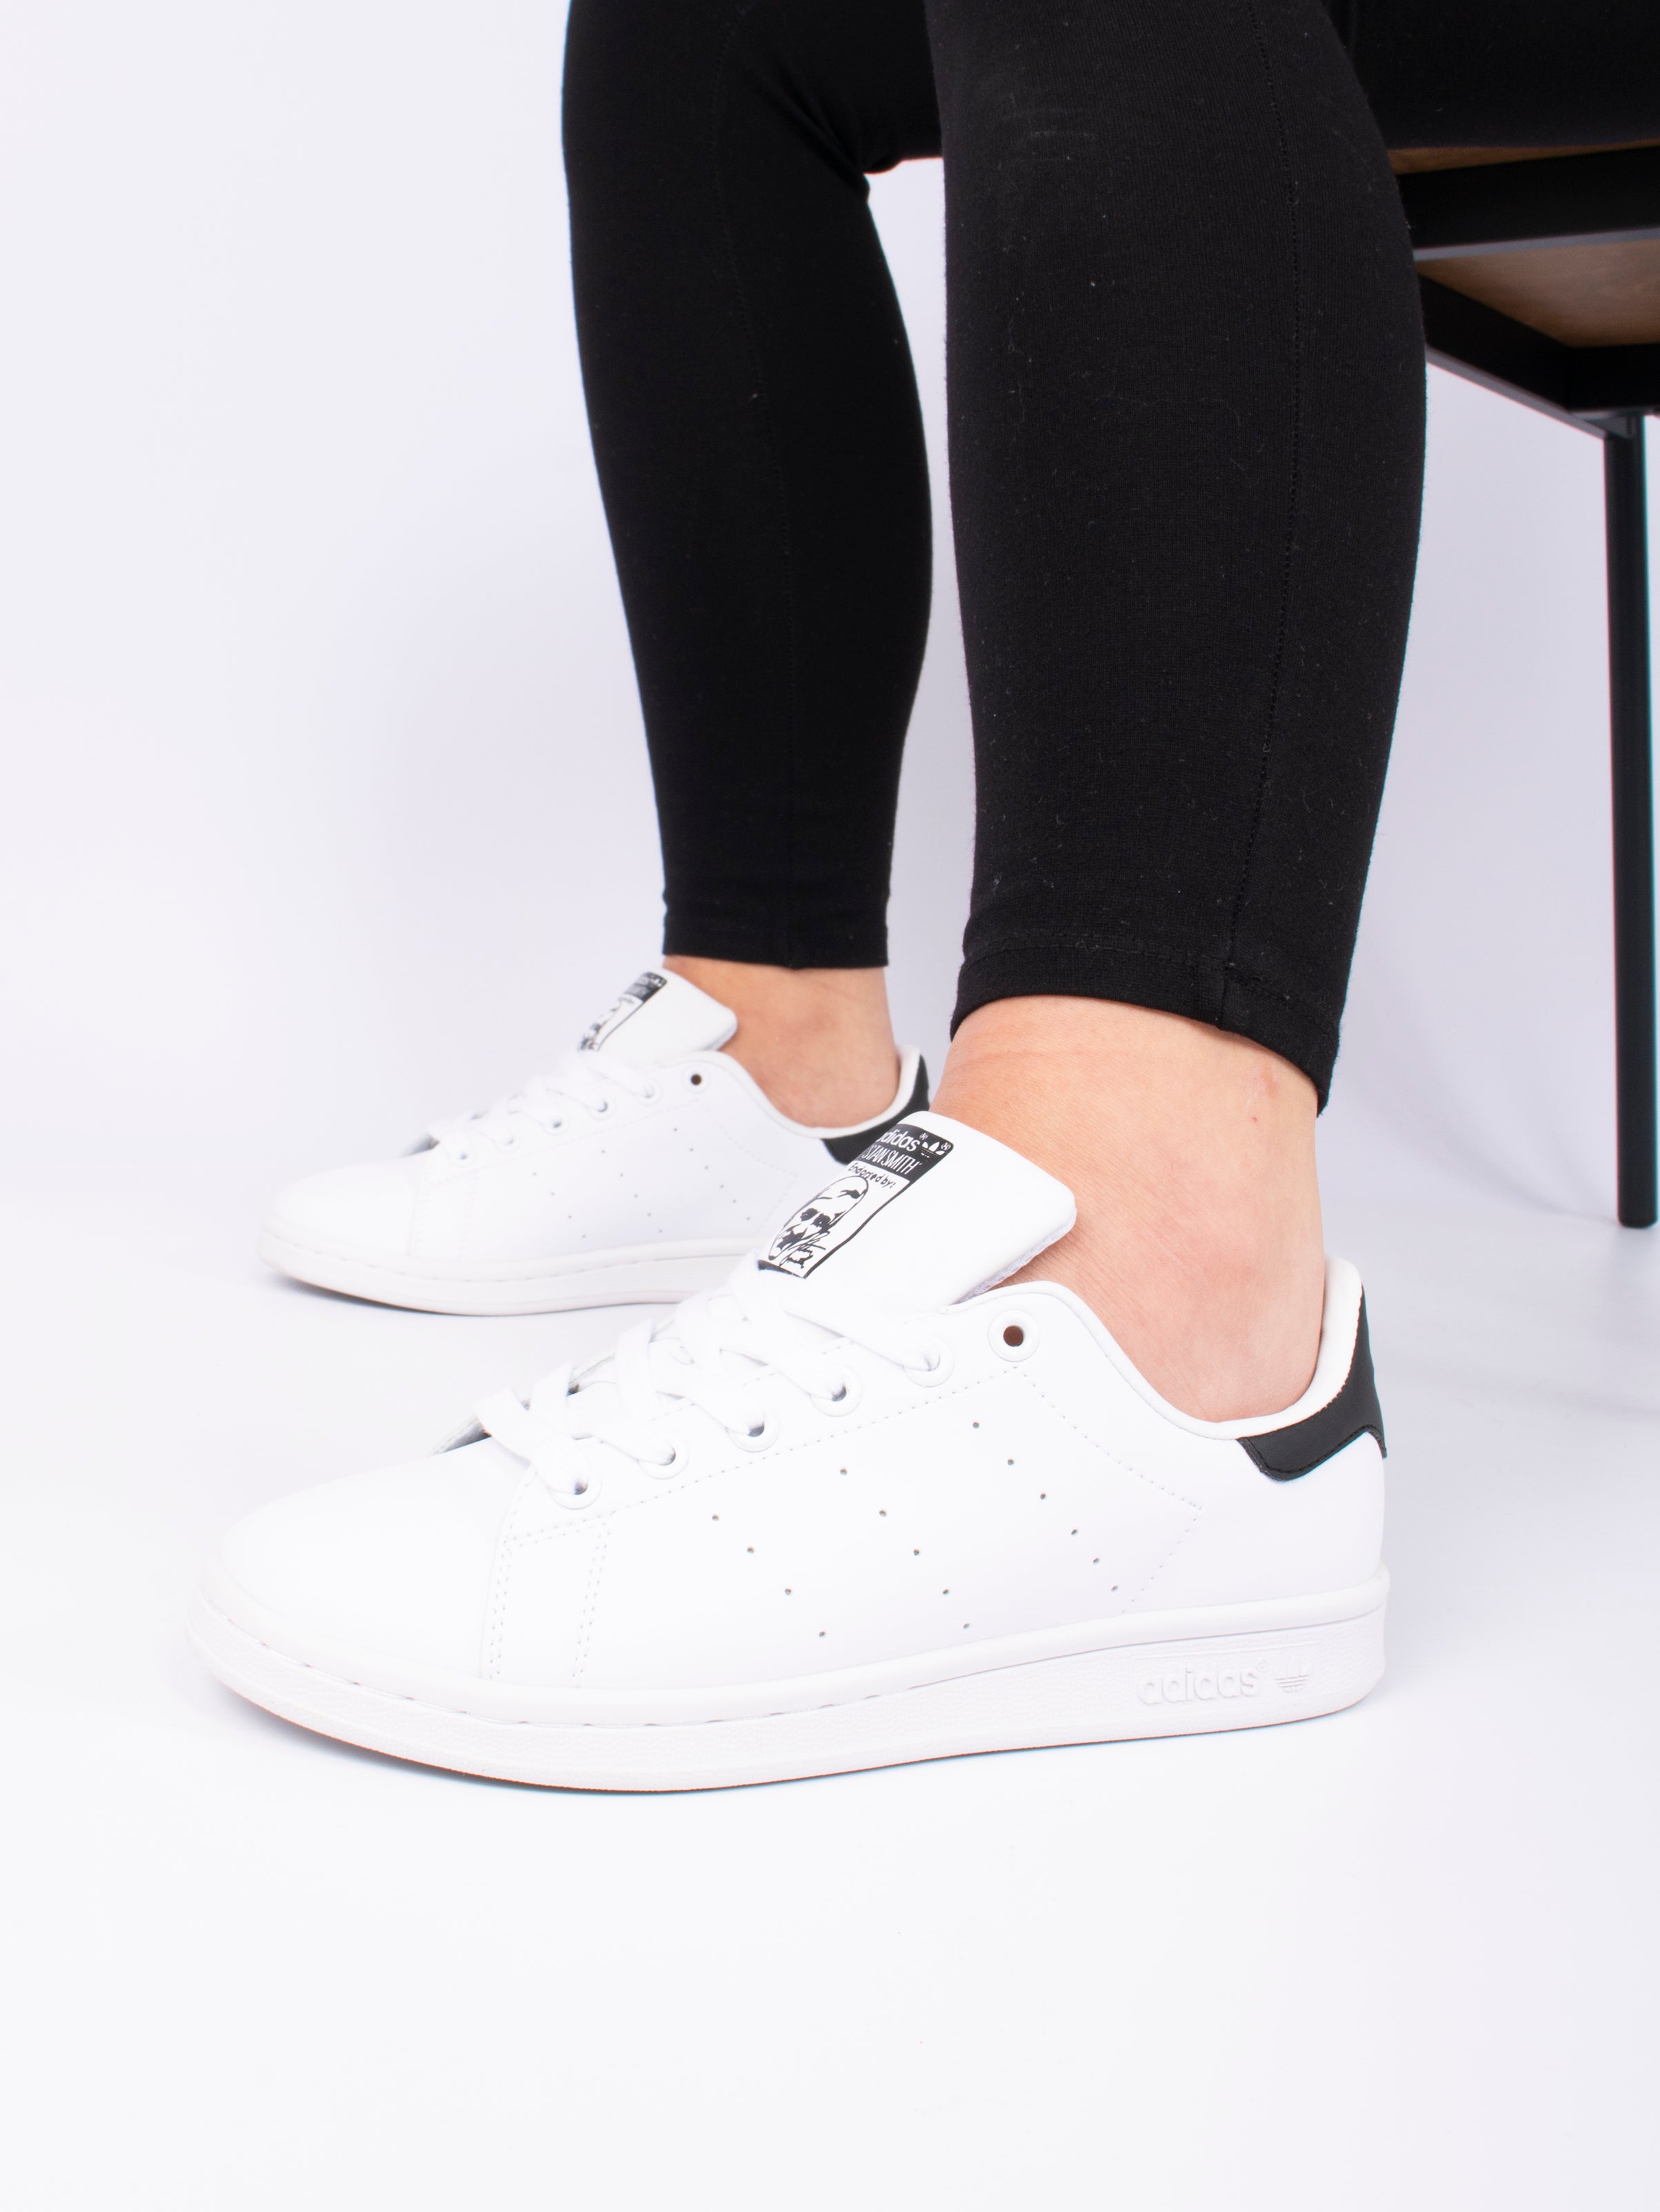 Adidas Stansmith WHITE AND BLACK